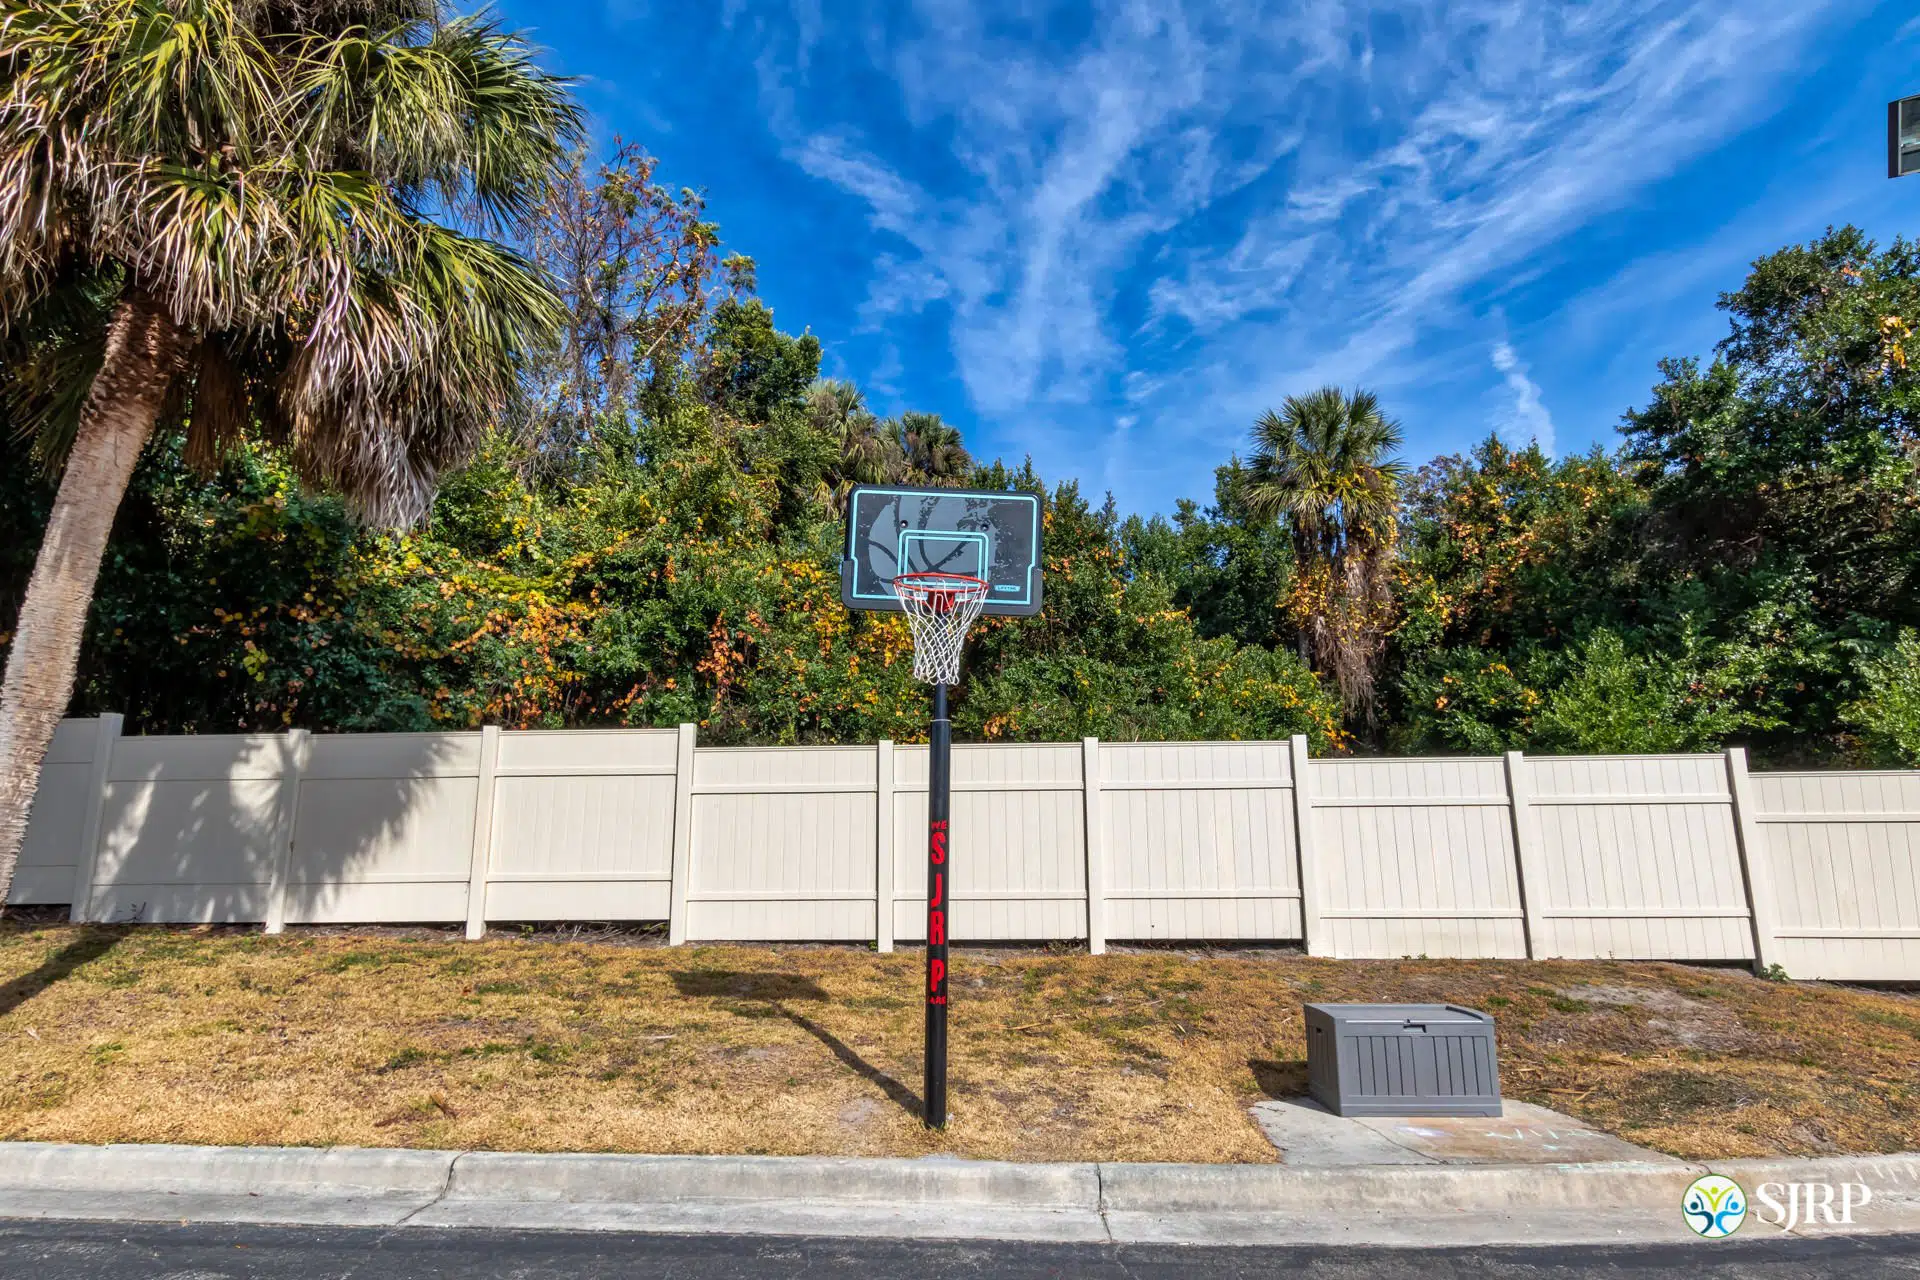 Basketball hoop, white fence lining street, trees in forest behind.